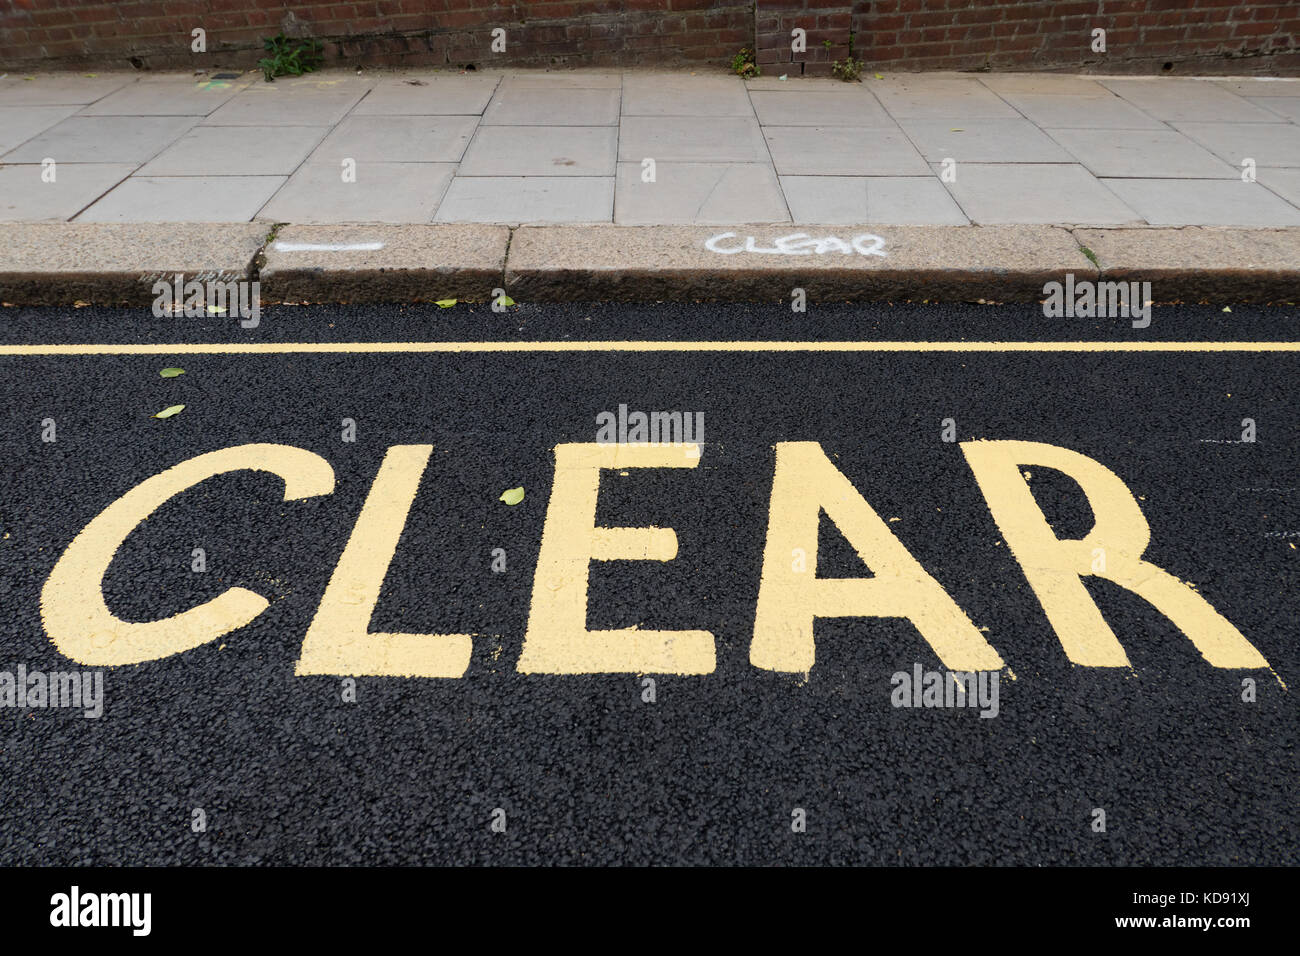 The word 'Clear' stencilled on the road and sprayed on the kerb Stock Photo